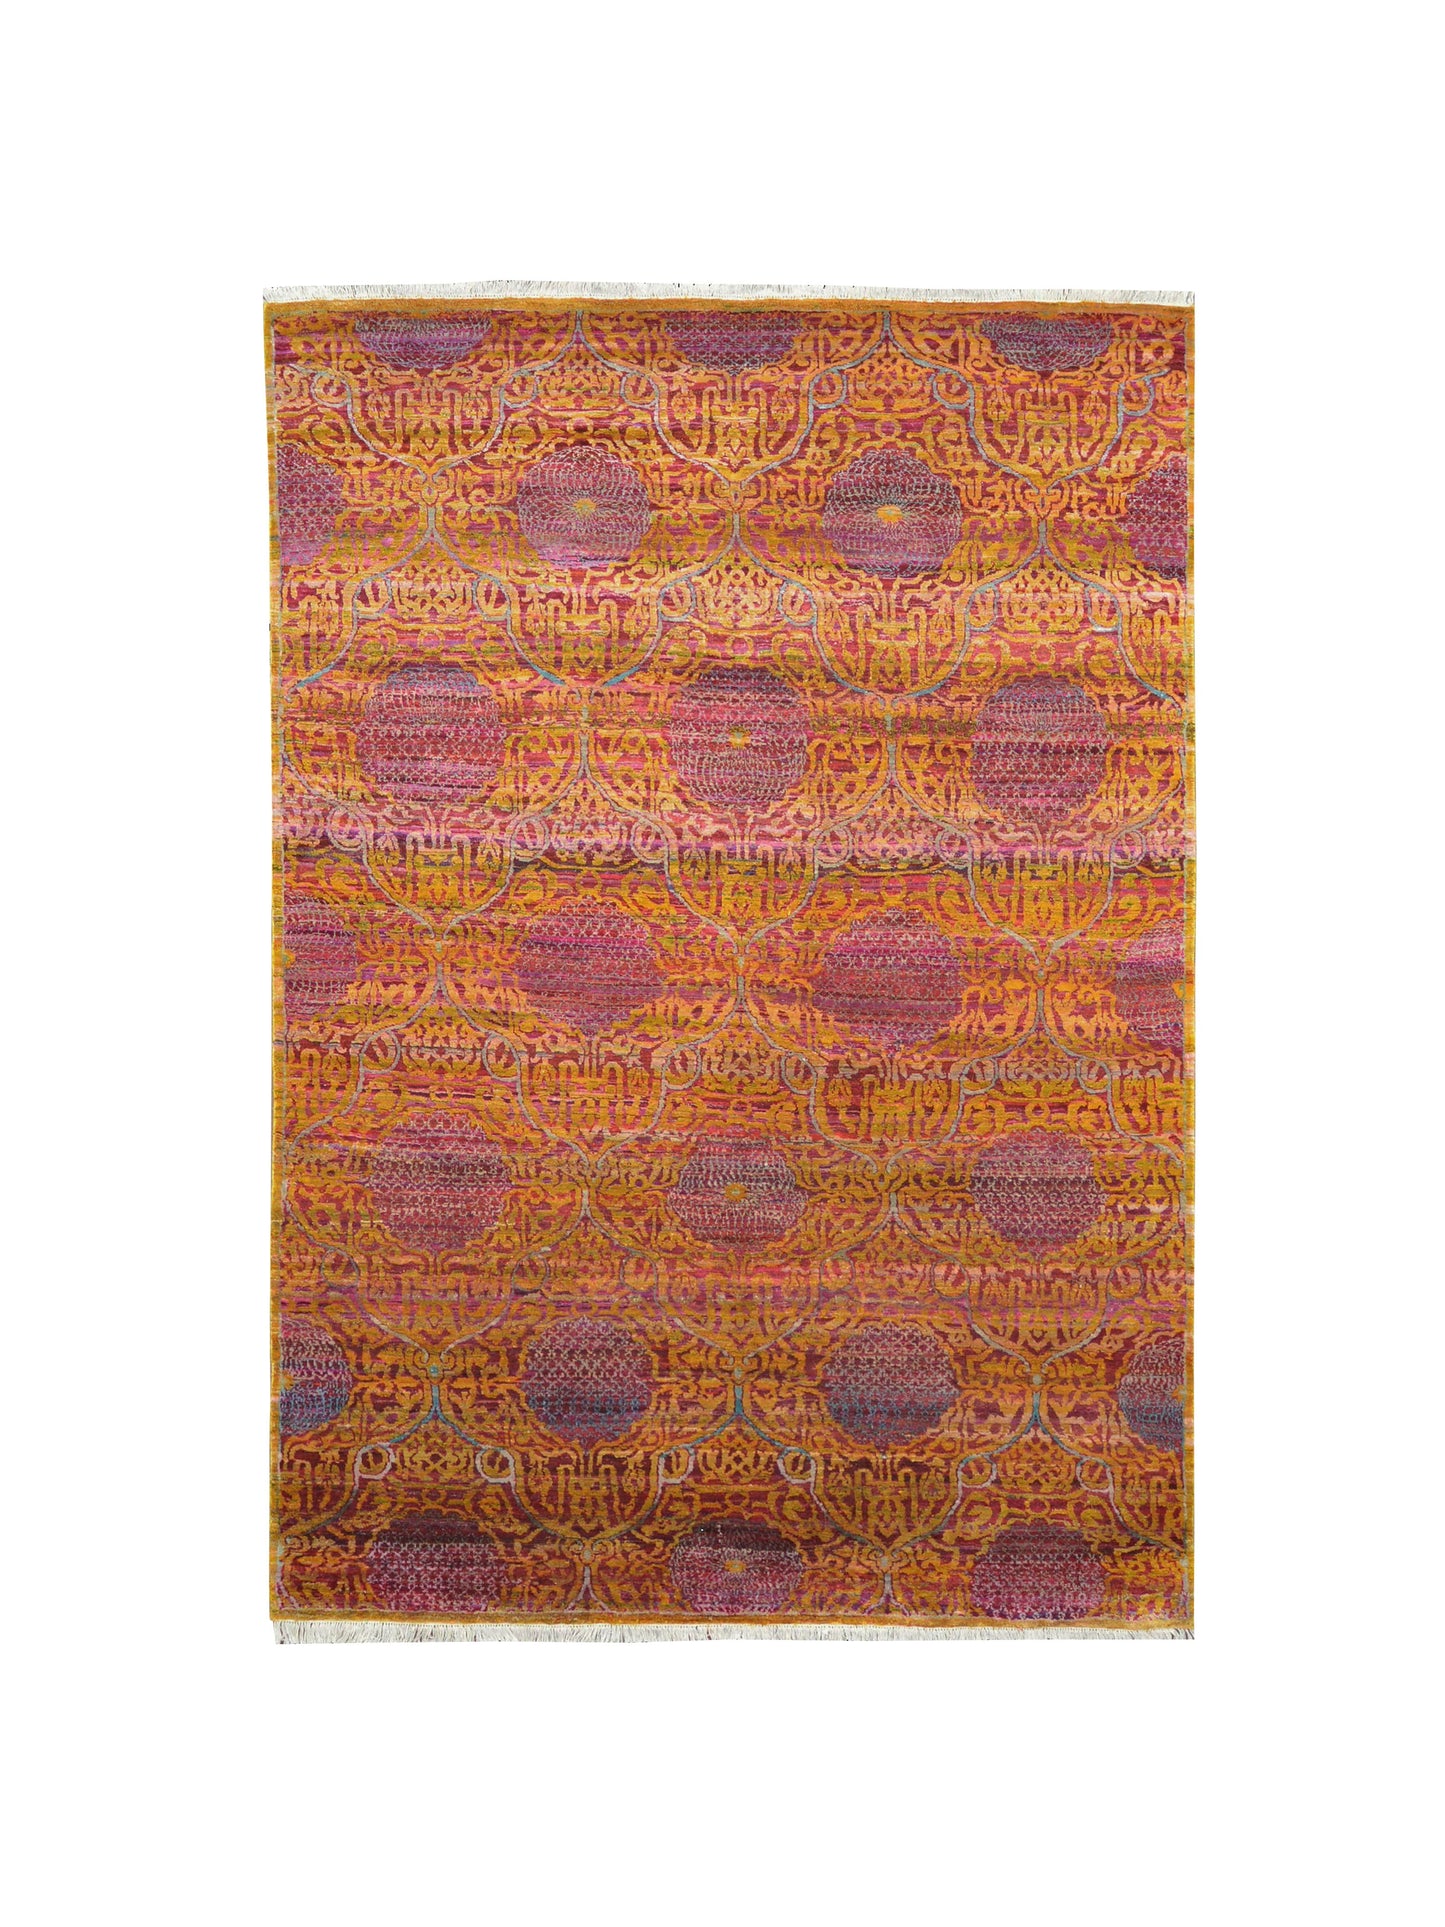 Get trendy with Orange Pink Pure Sari Silk Modern Area Rug 6.0x9.4ft 184x282Cms - Modern Rugs available at Jaipur Oriental Rugs. Grab yours for $4030.00 today!